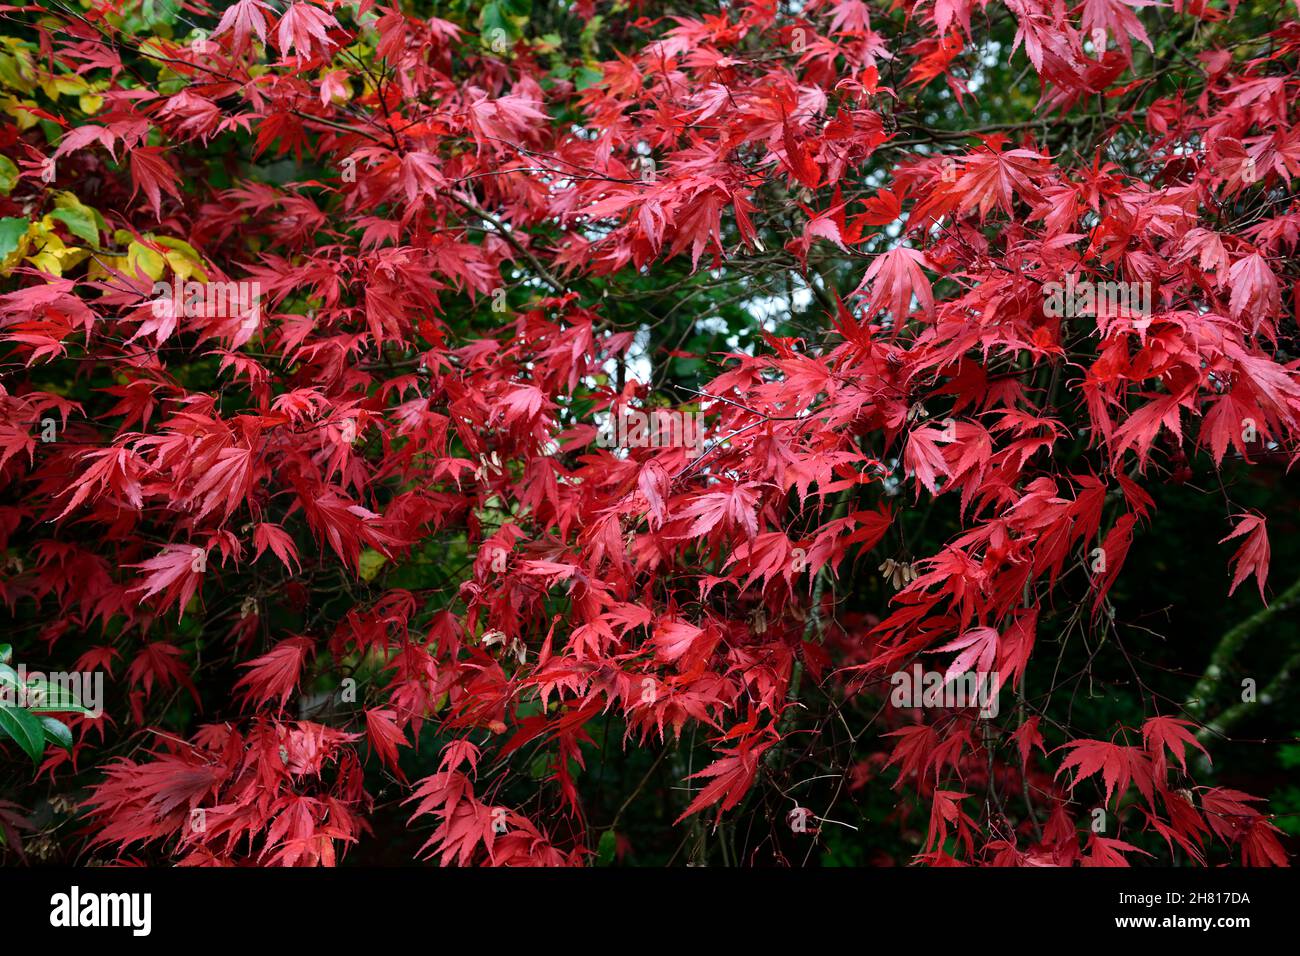 acer palmatum chitoseyama,acers,bright red,crimson red,leaves,foliage,autumn,autumnal,fall,ornamental,tree,trees,garden,RM Floral Stock Photo